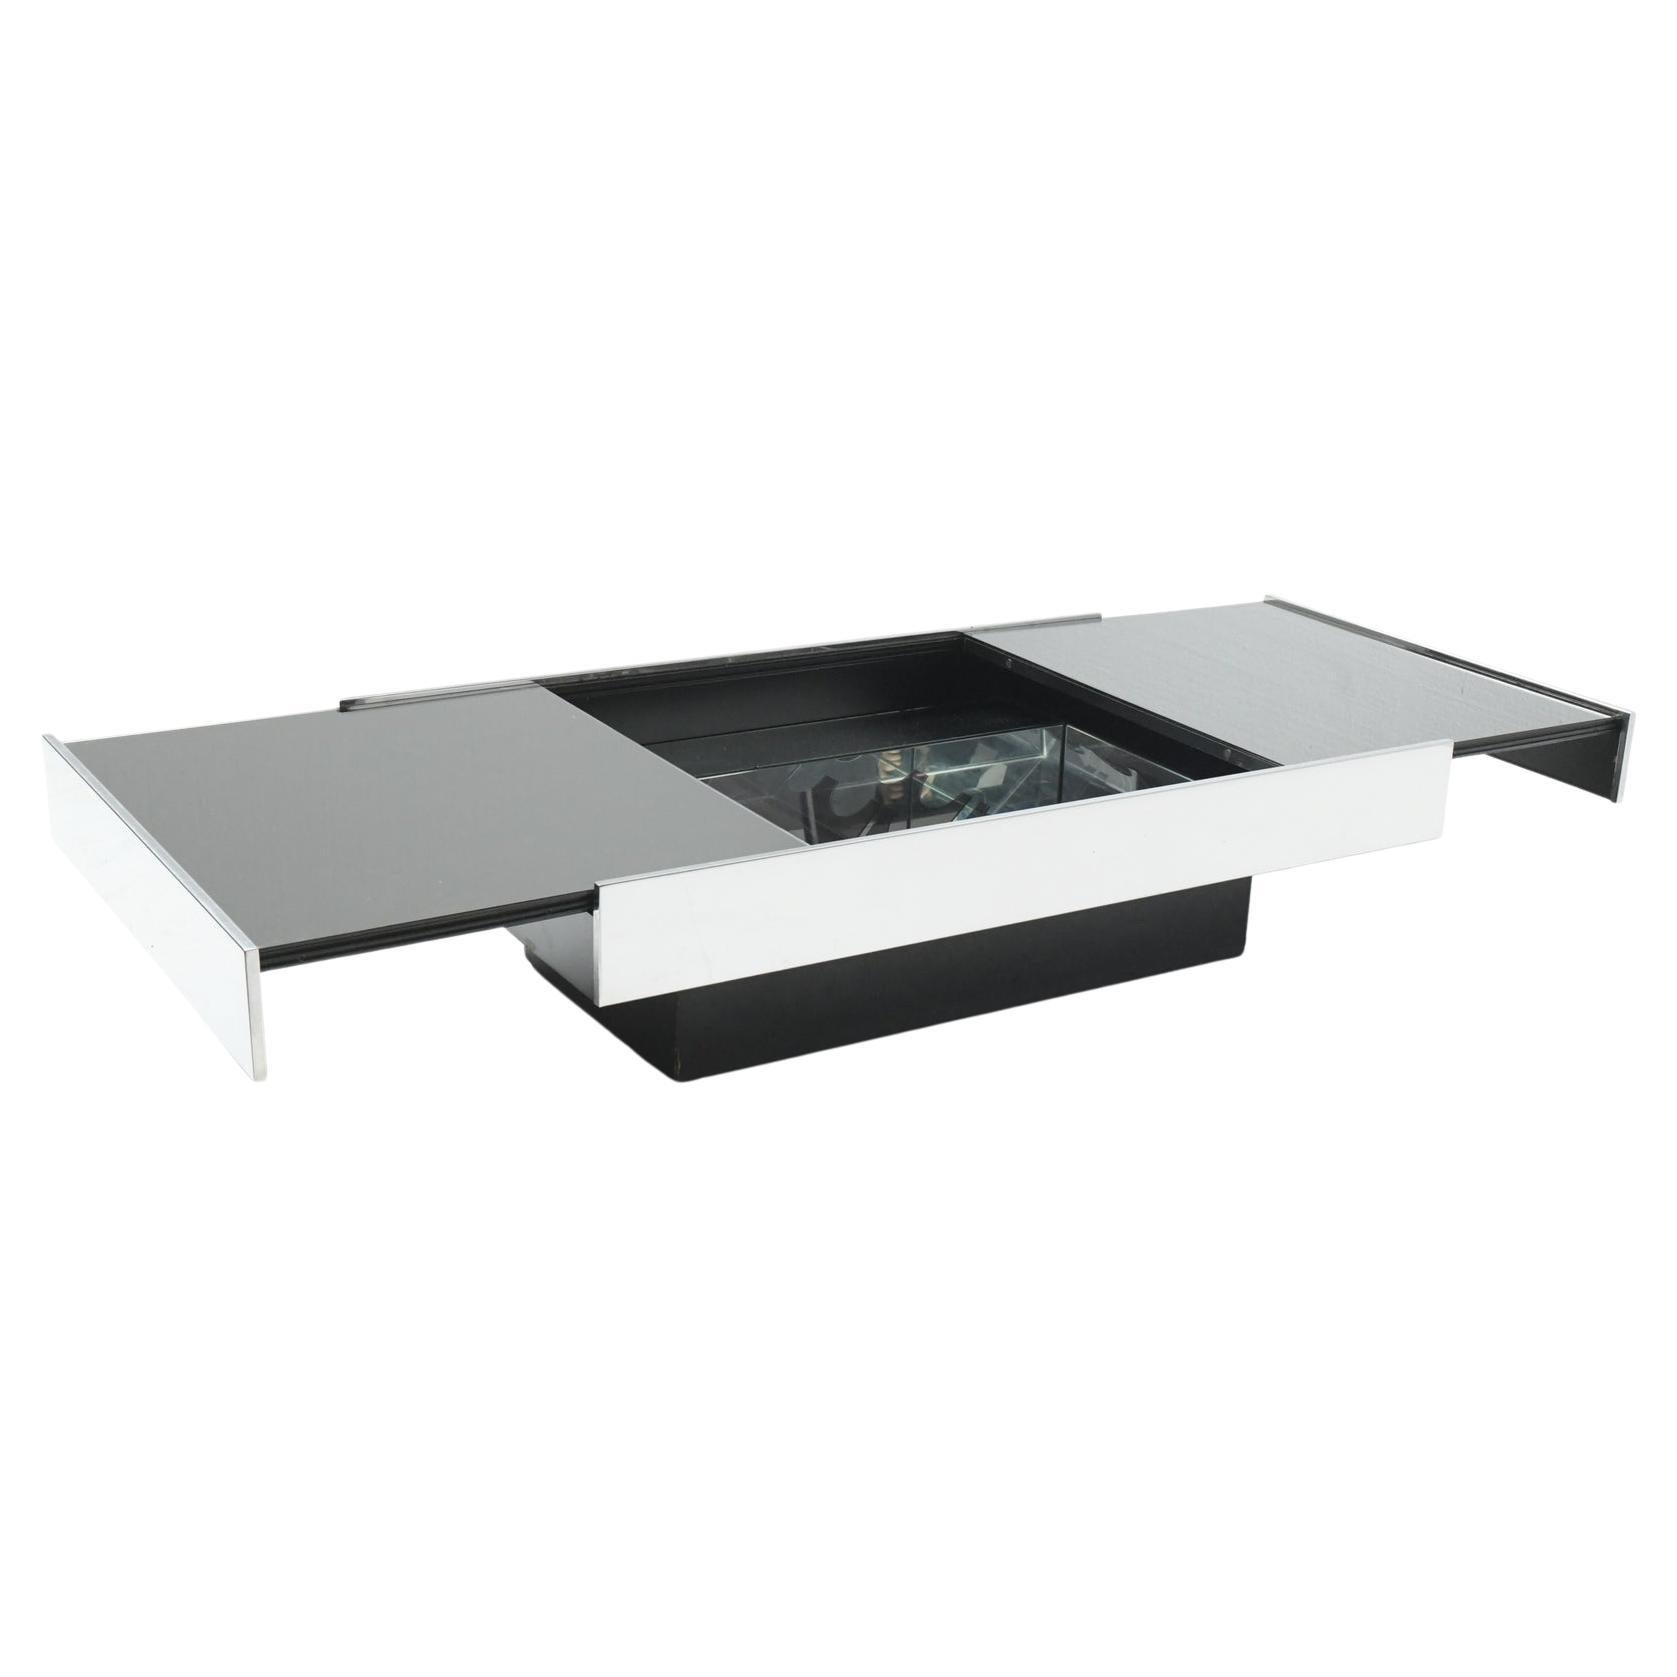 Stunning, Mirrored & Steel Coffee Table with Hidden Dry Bar by Willy Rizzo Italy